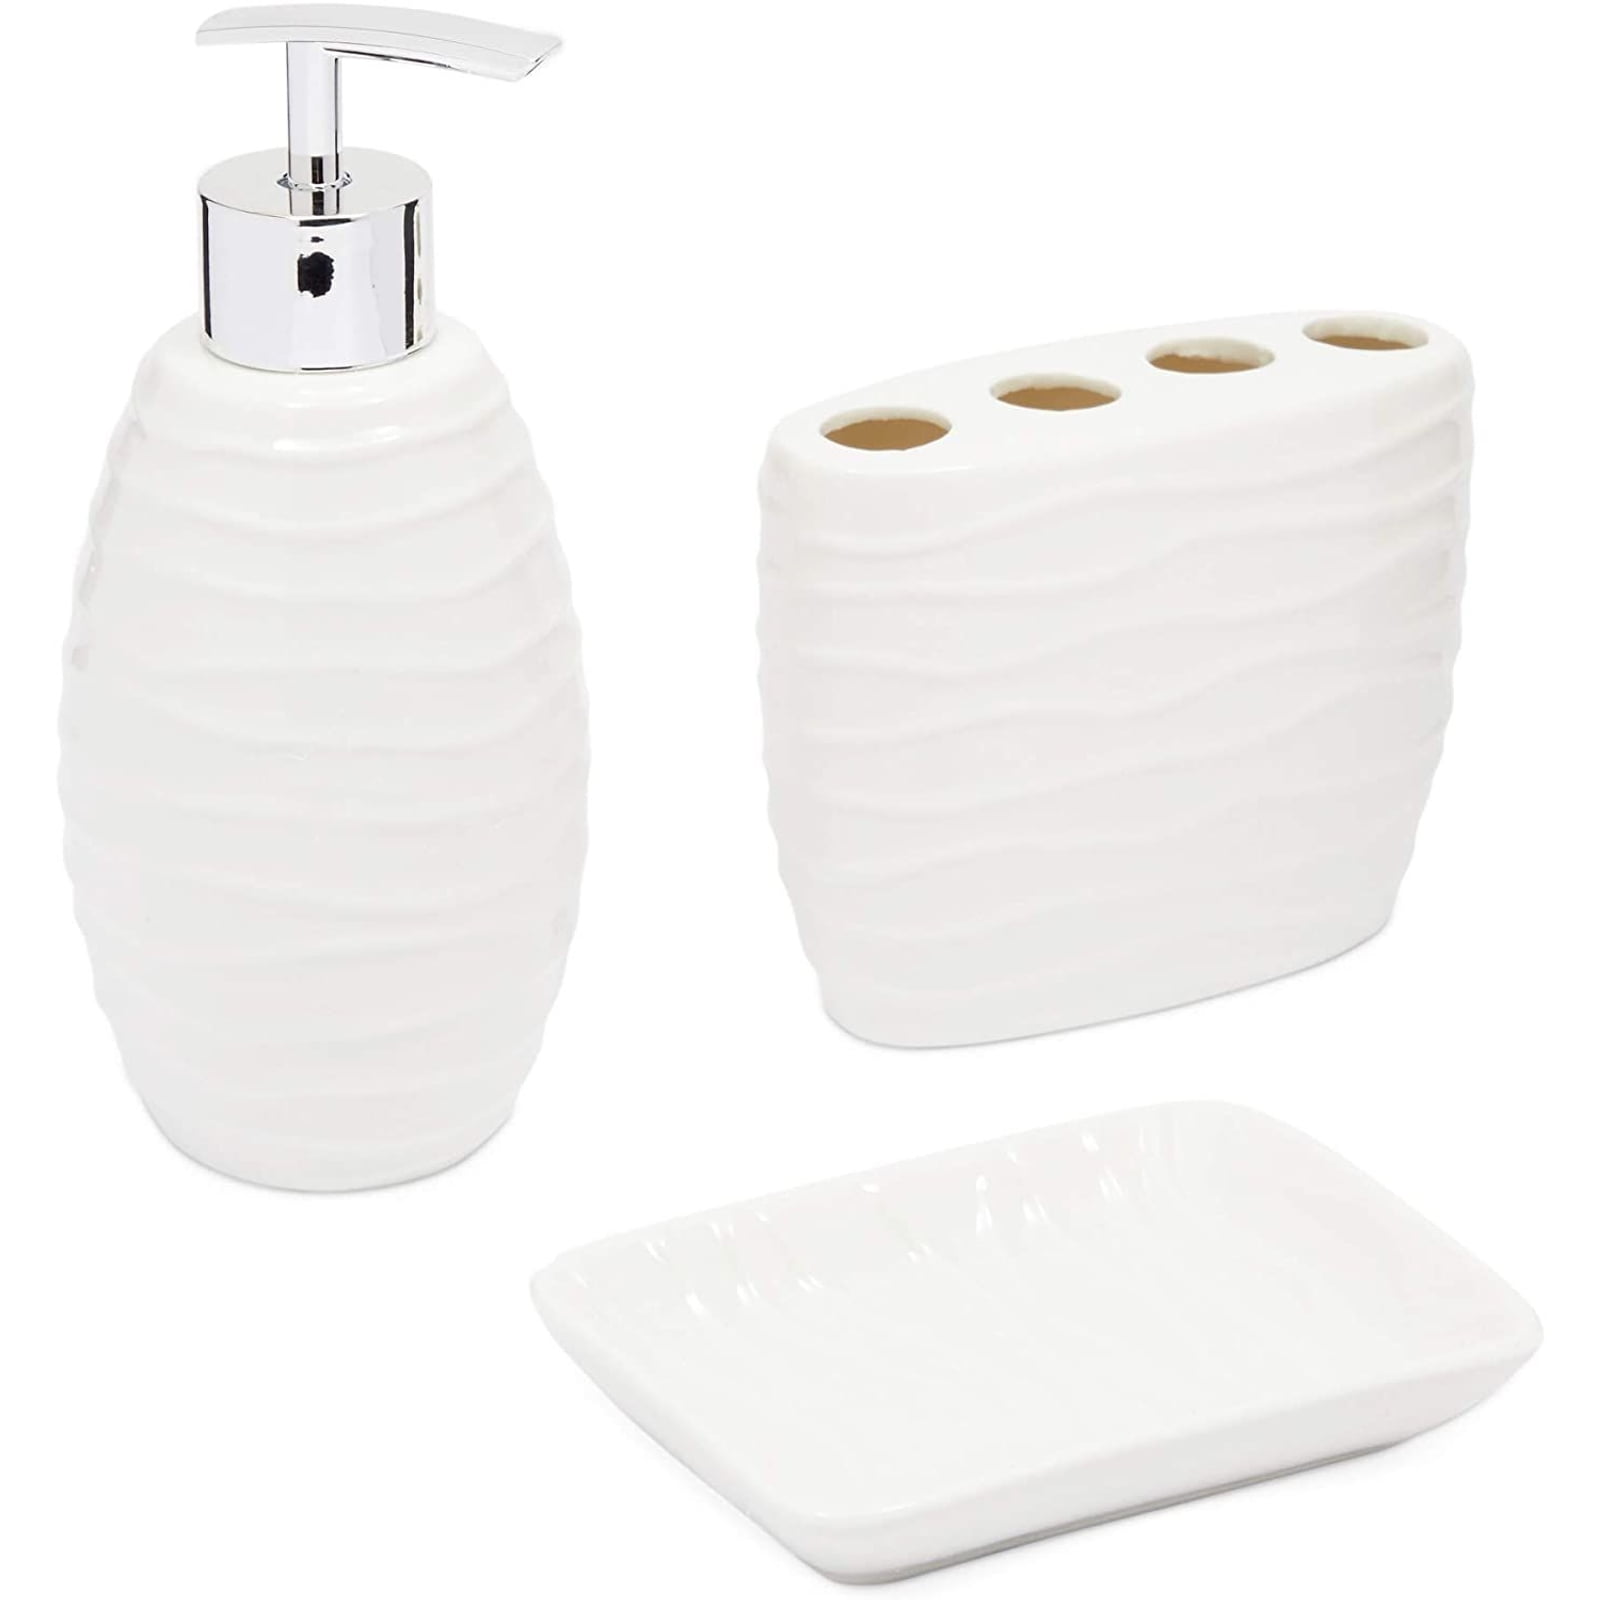 Dish and Toothbrush Holder Soap Dispenser 3 Piece Bathroom Accessories Set 